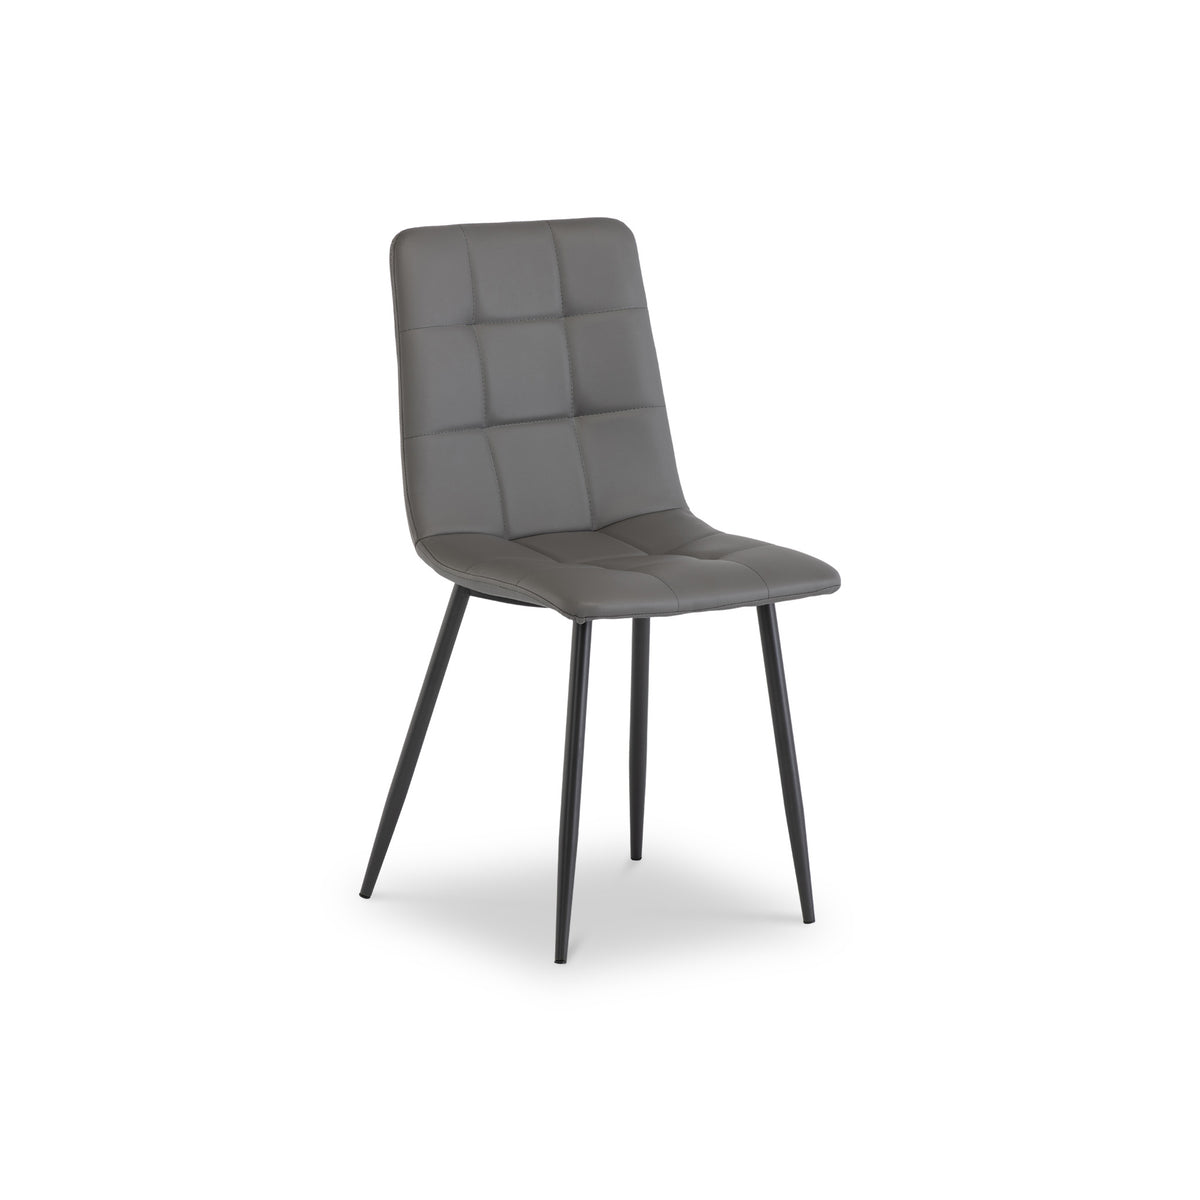  Alis Grey Faux Leather Dining Chair from Roseland Furniture